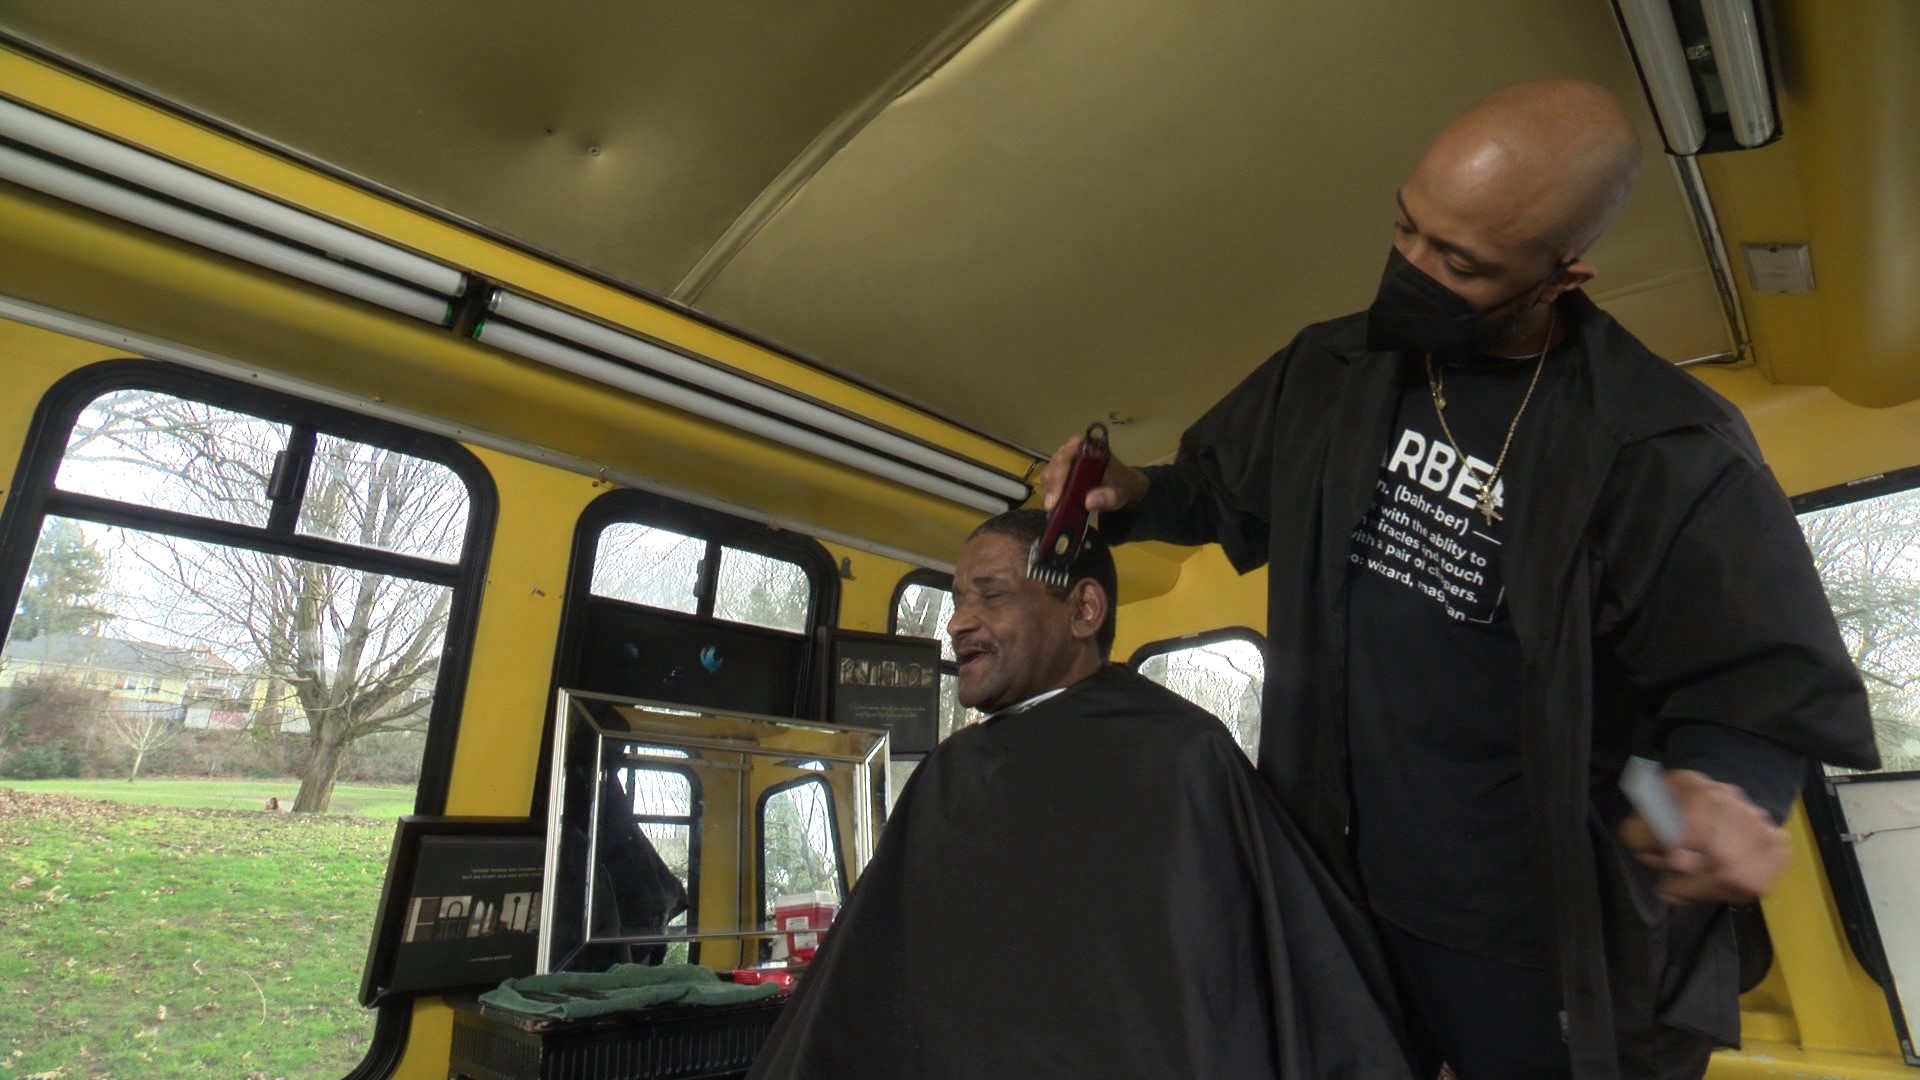 Diesel the Barber appreciates the journey cut by cut, mile by mile. #k5evening